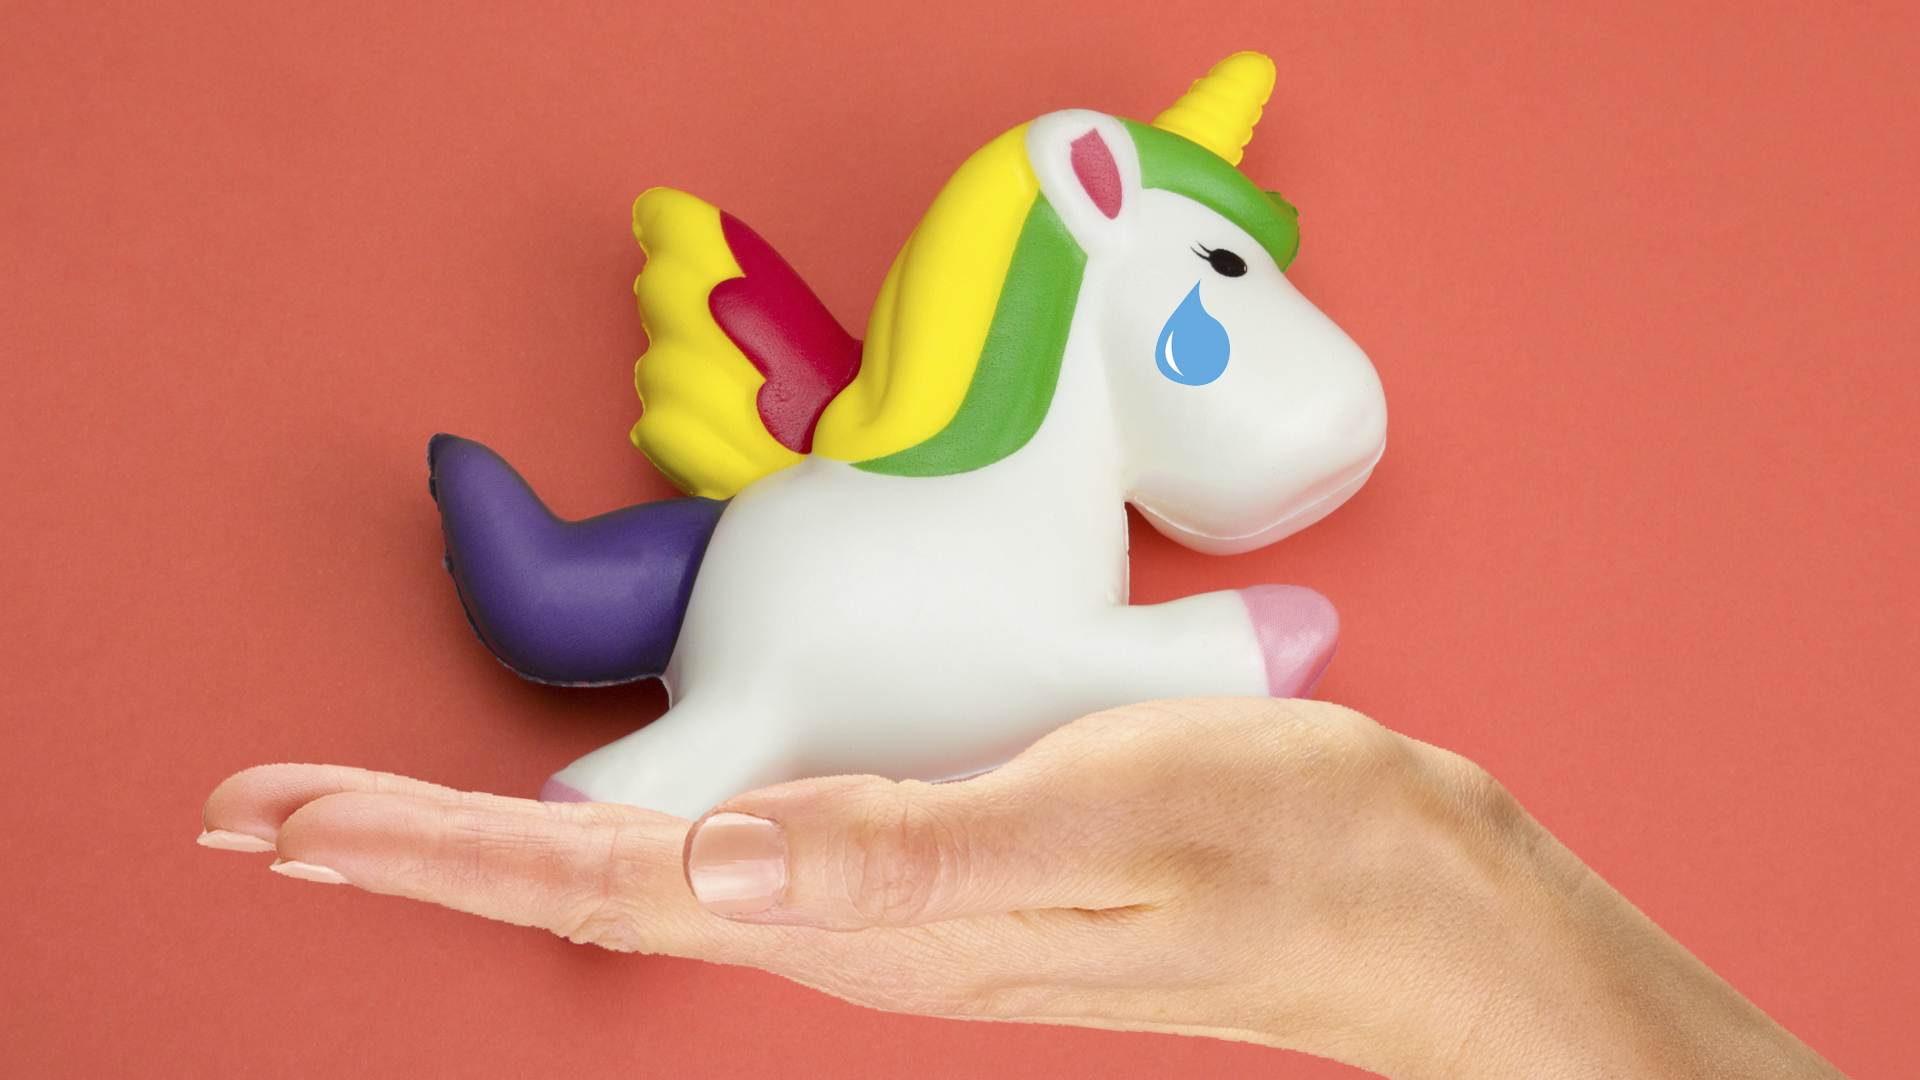 A unicorn squishy sits in the palm of someone's hand